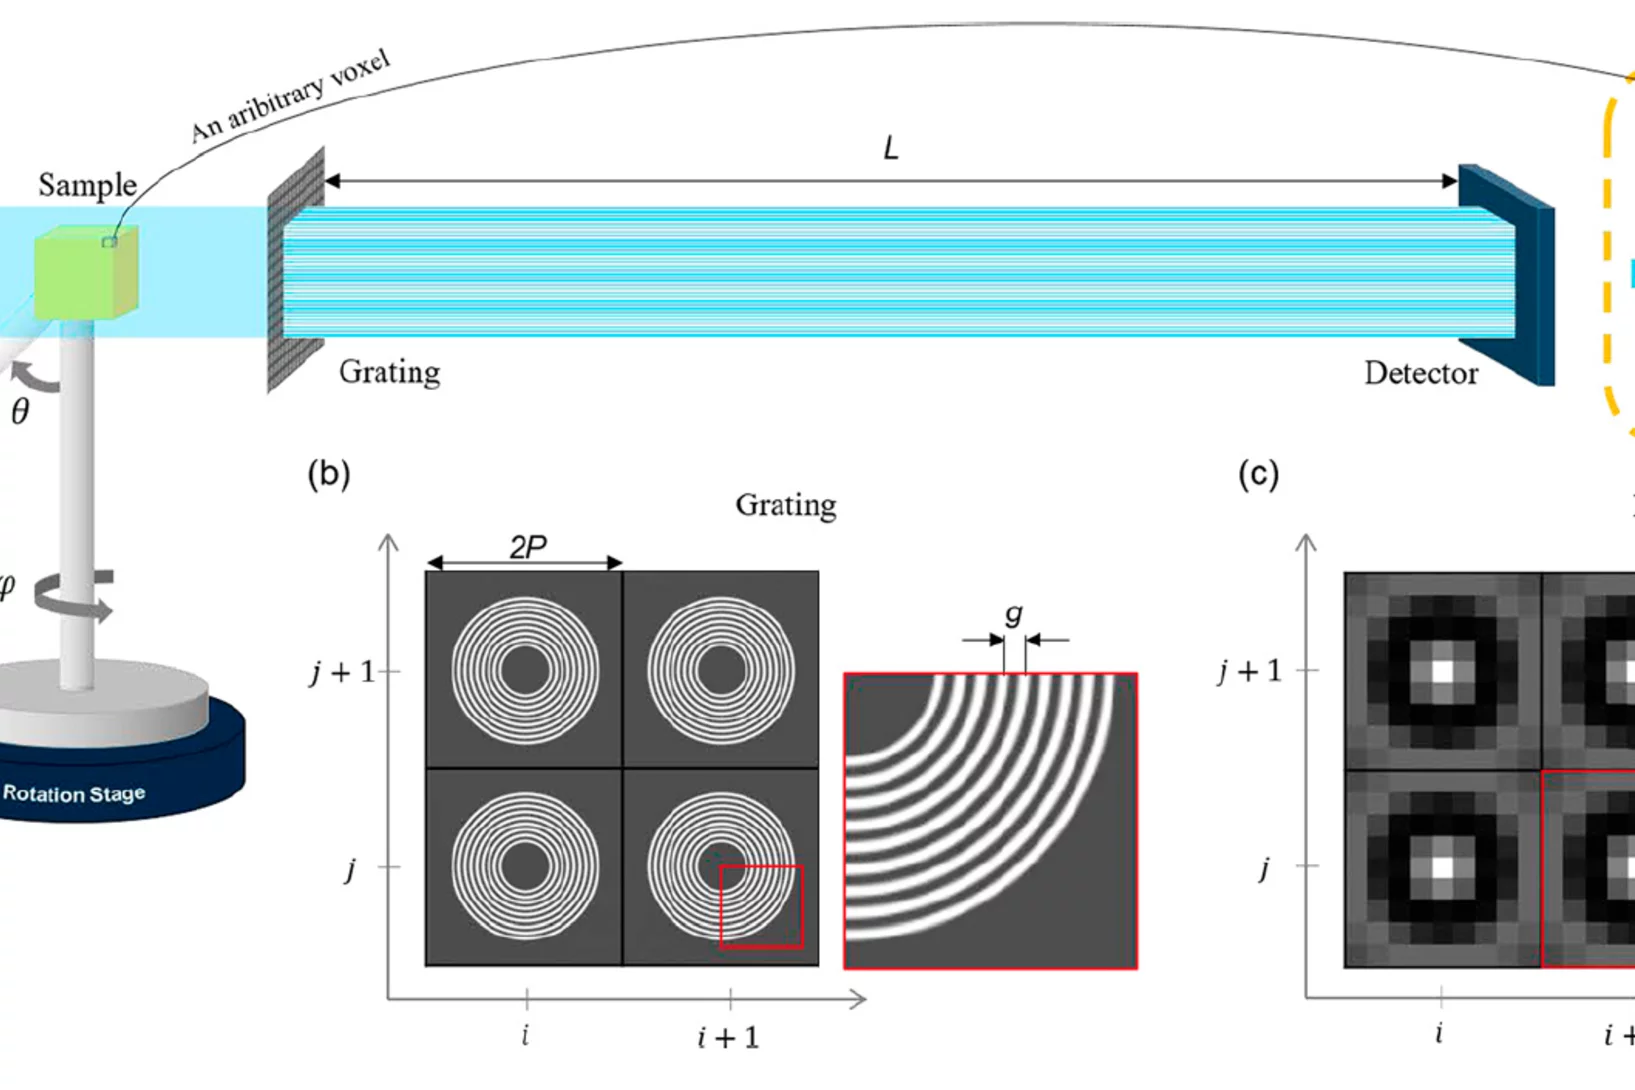 X-ray scattering tensor tomography with circular gratings